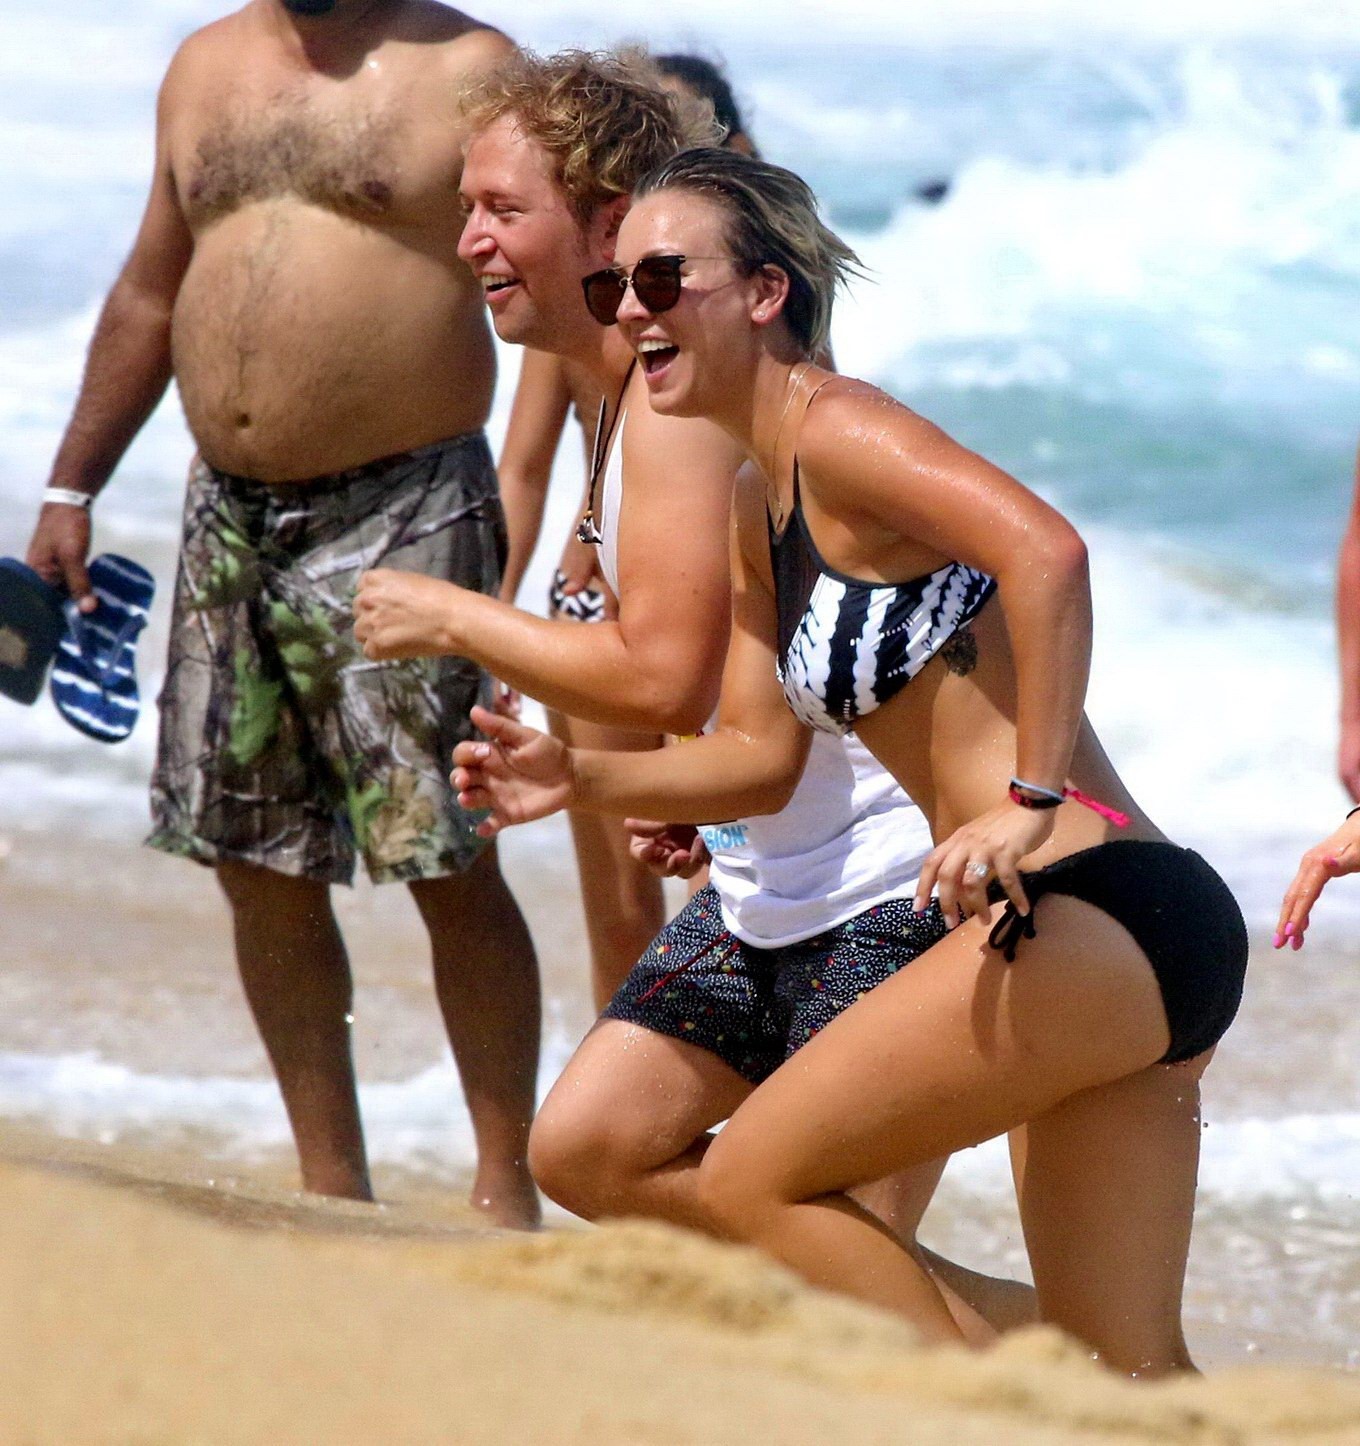 Kaley Cuoco shows off her ass wearing a monochrome bikini on a beach in Mexico #75191941